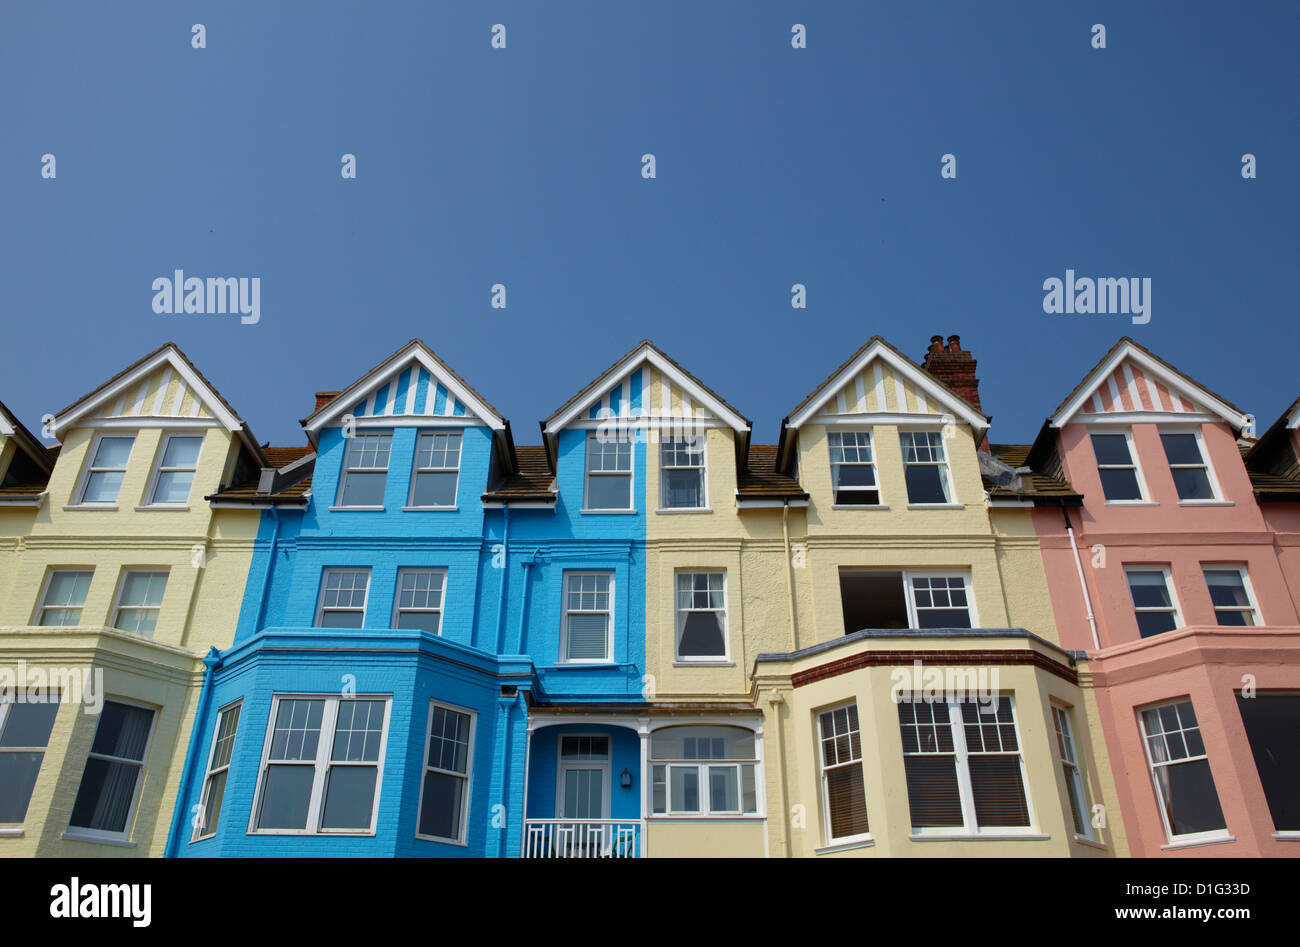 Colourful seafront houses at Aldeburgh, Suffolk, England, United Kingdom, Europe Stock Photo